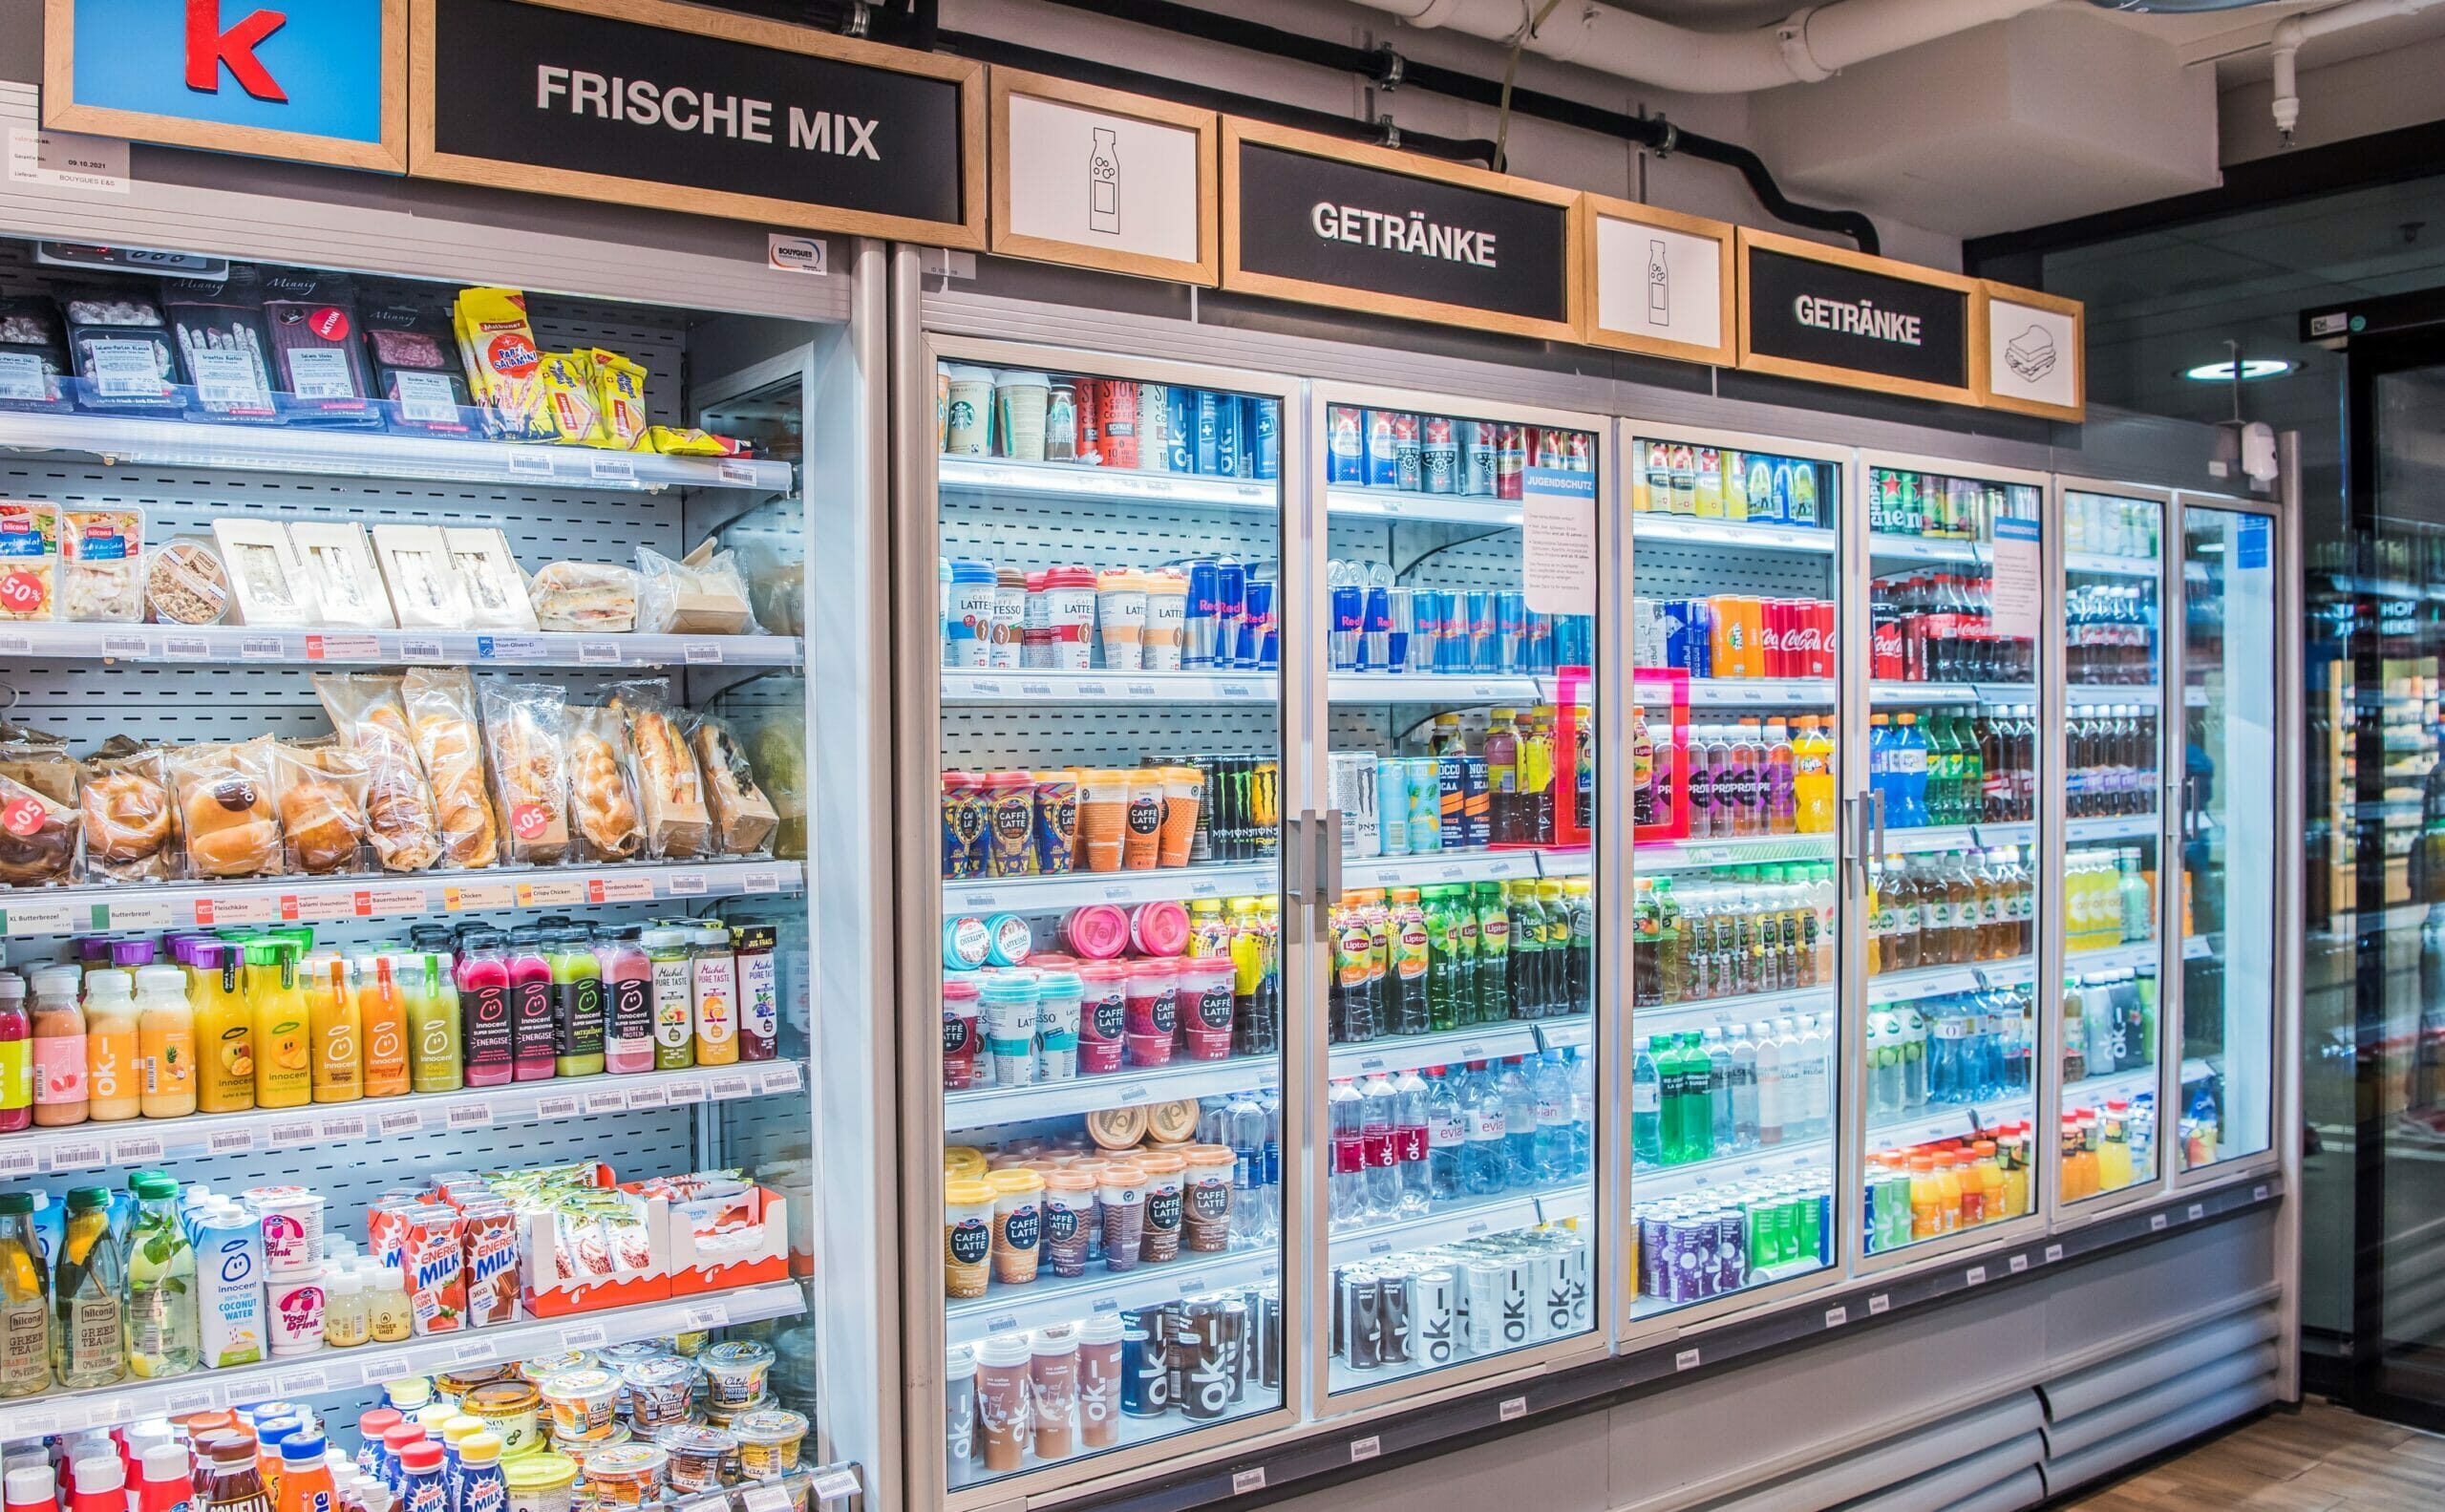 Apart from the «fresh mix module» the new k kiosk features a larger drinks selection.